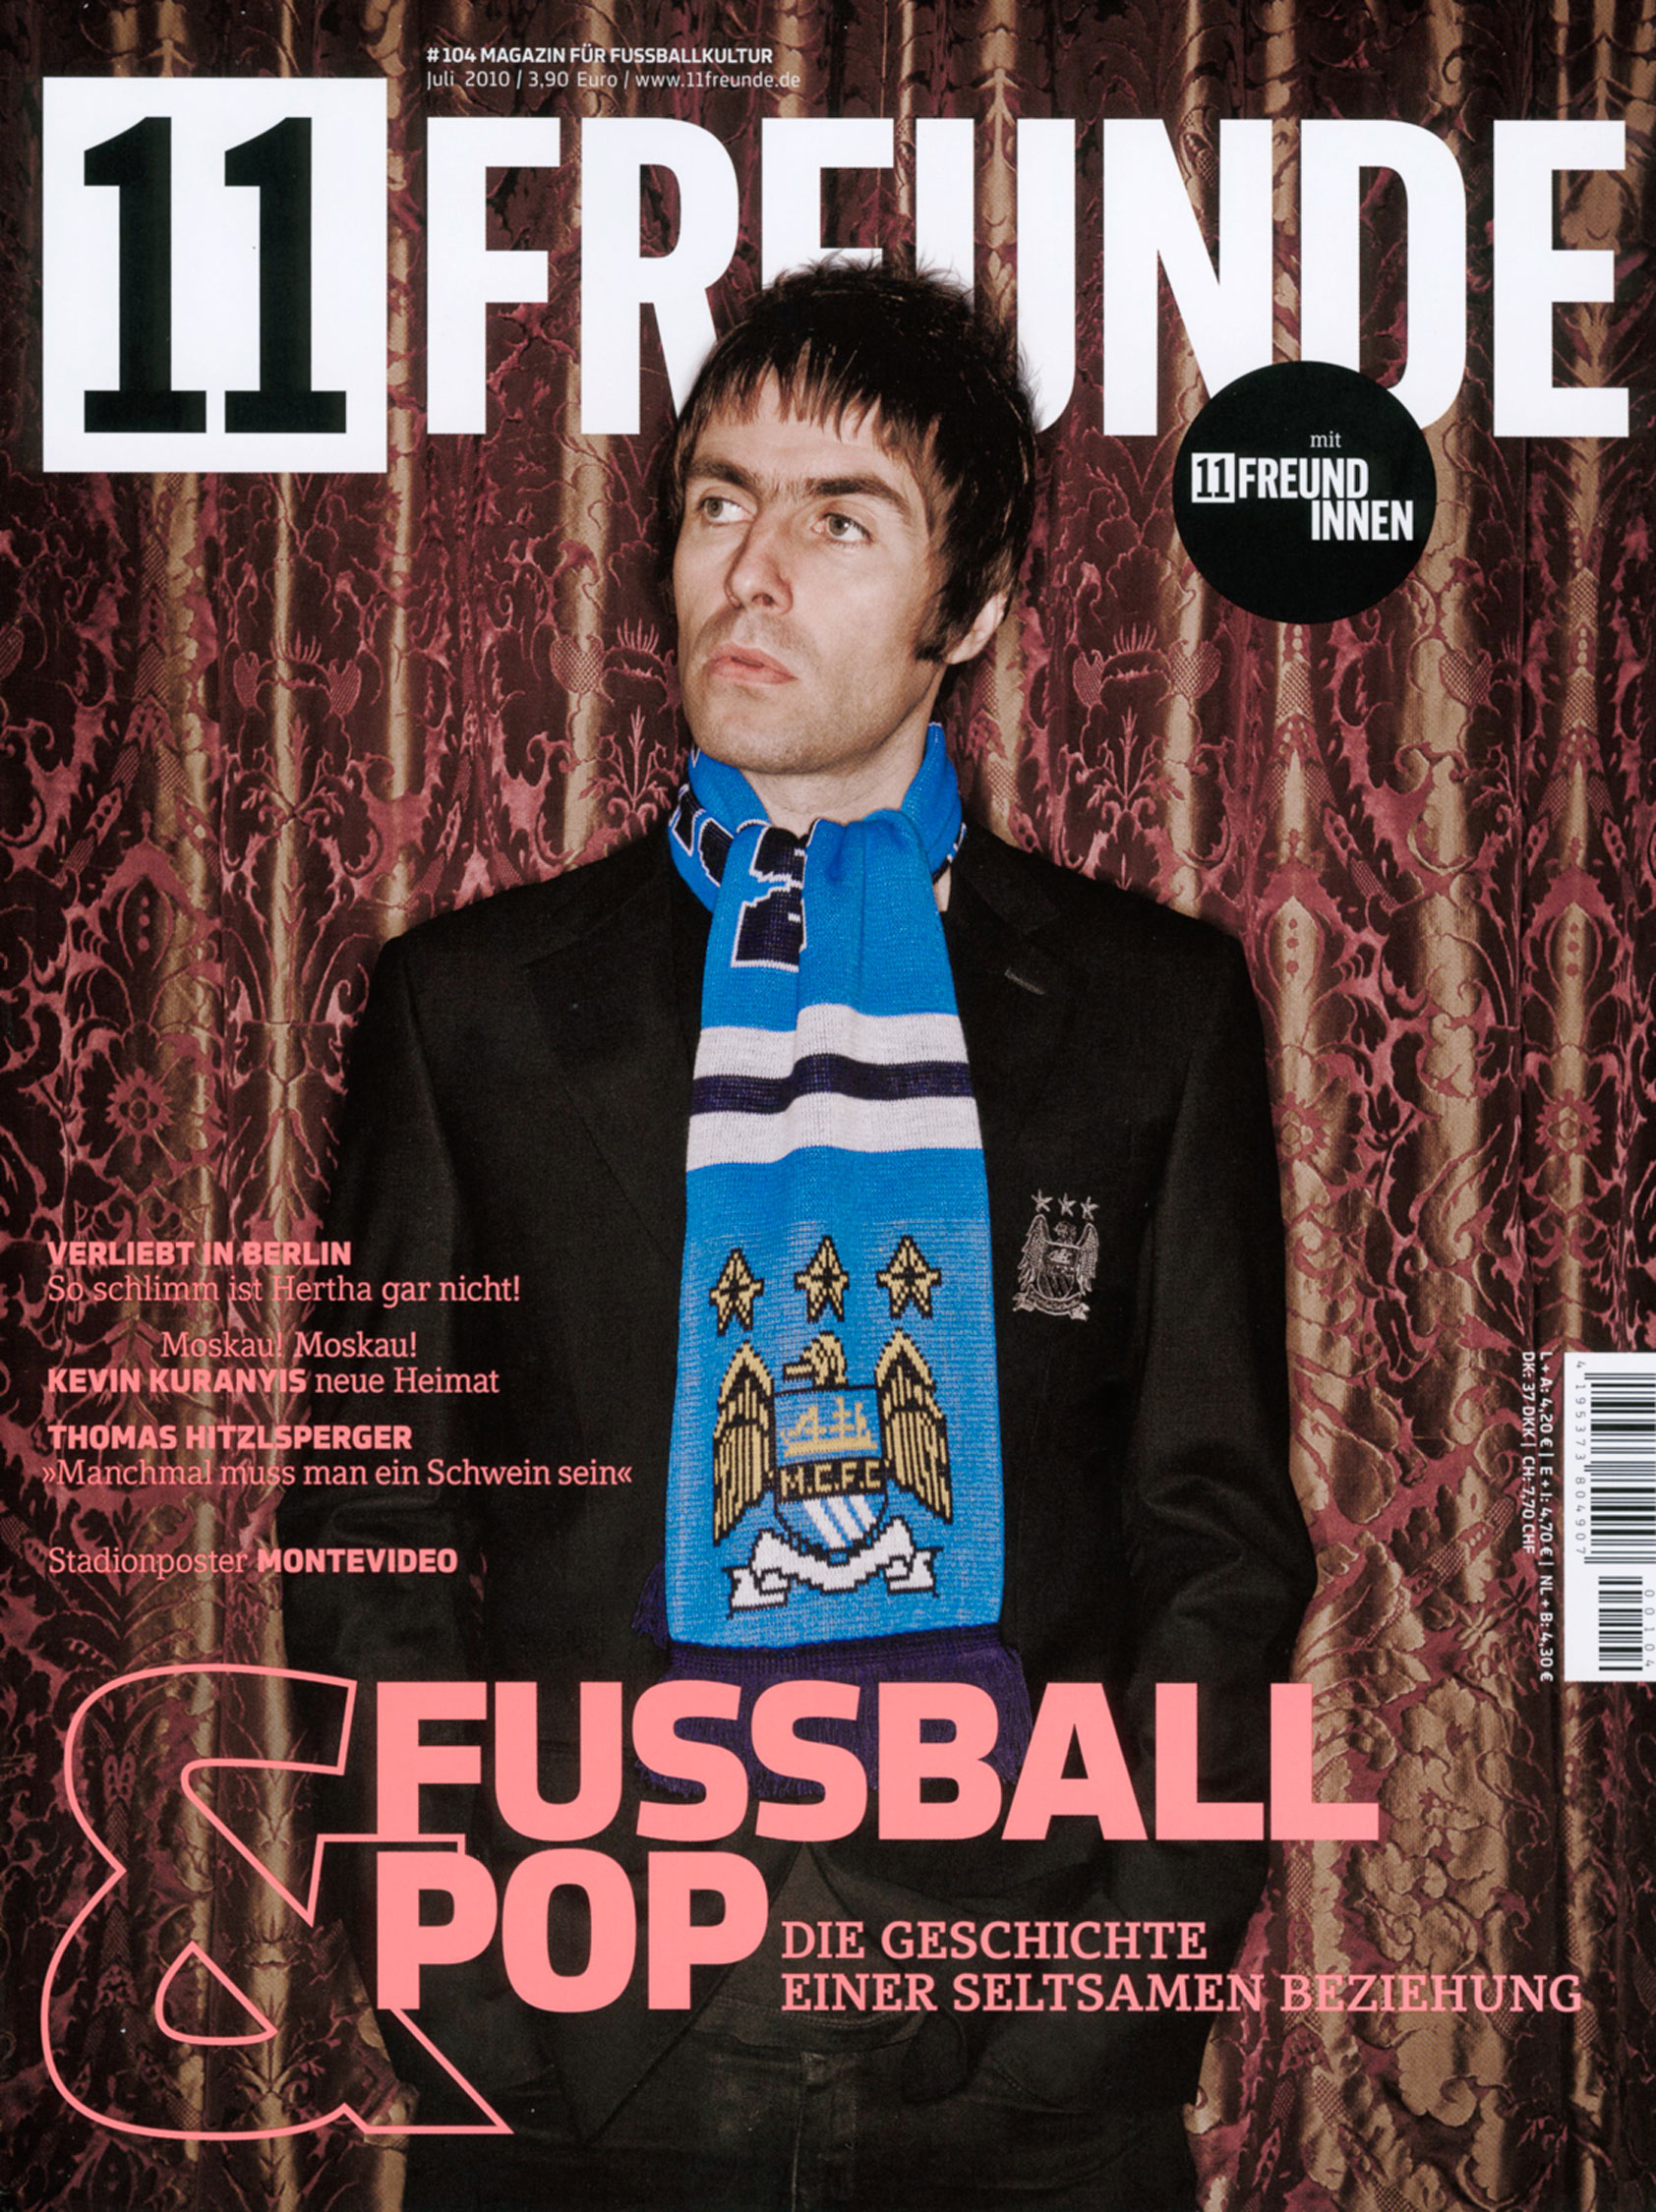 Liam Gallagher lead singer of Oasis in Manchester City Football scarf